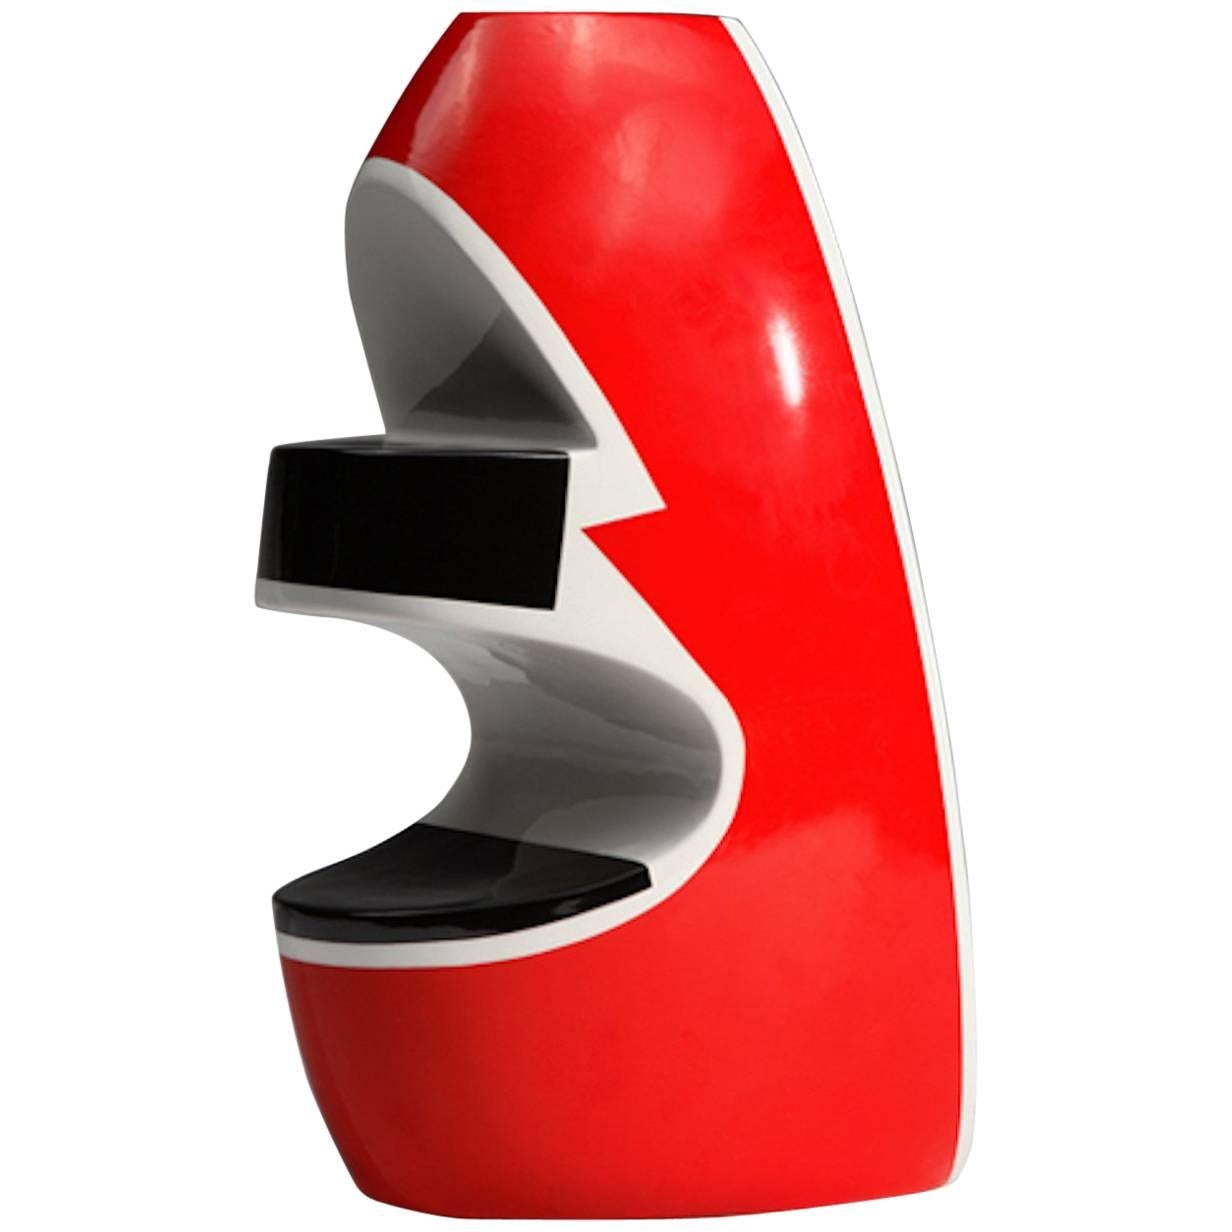 Italian Ceramic Vase Red Model by George Sowden for Superego Editions.